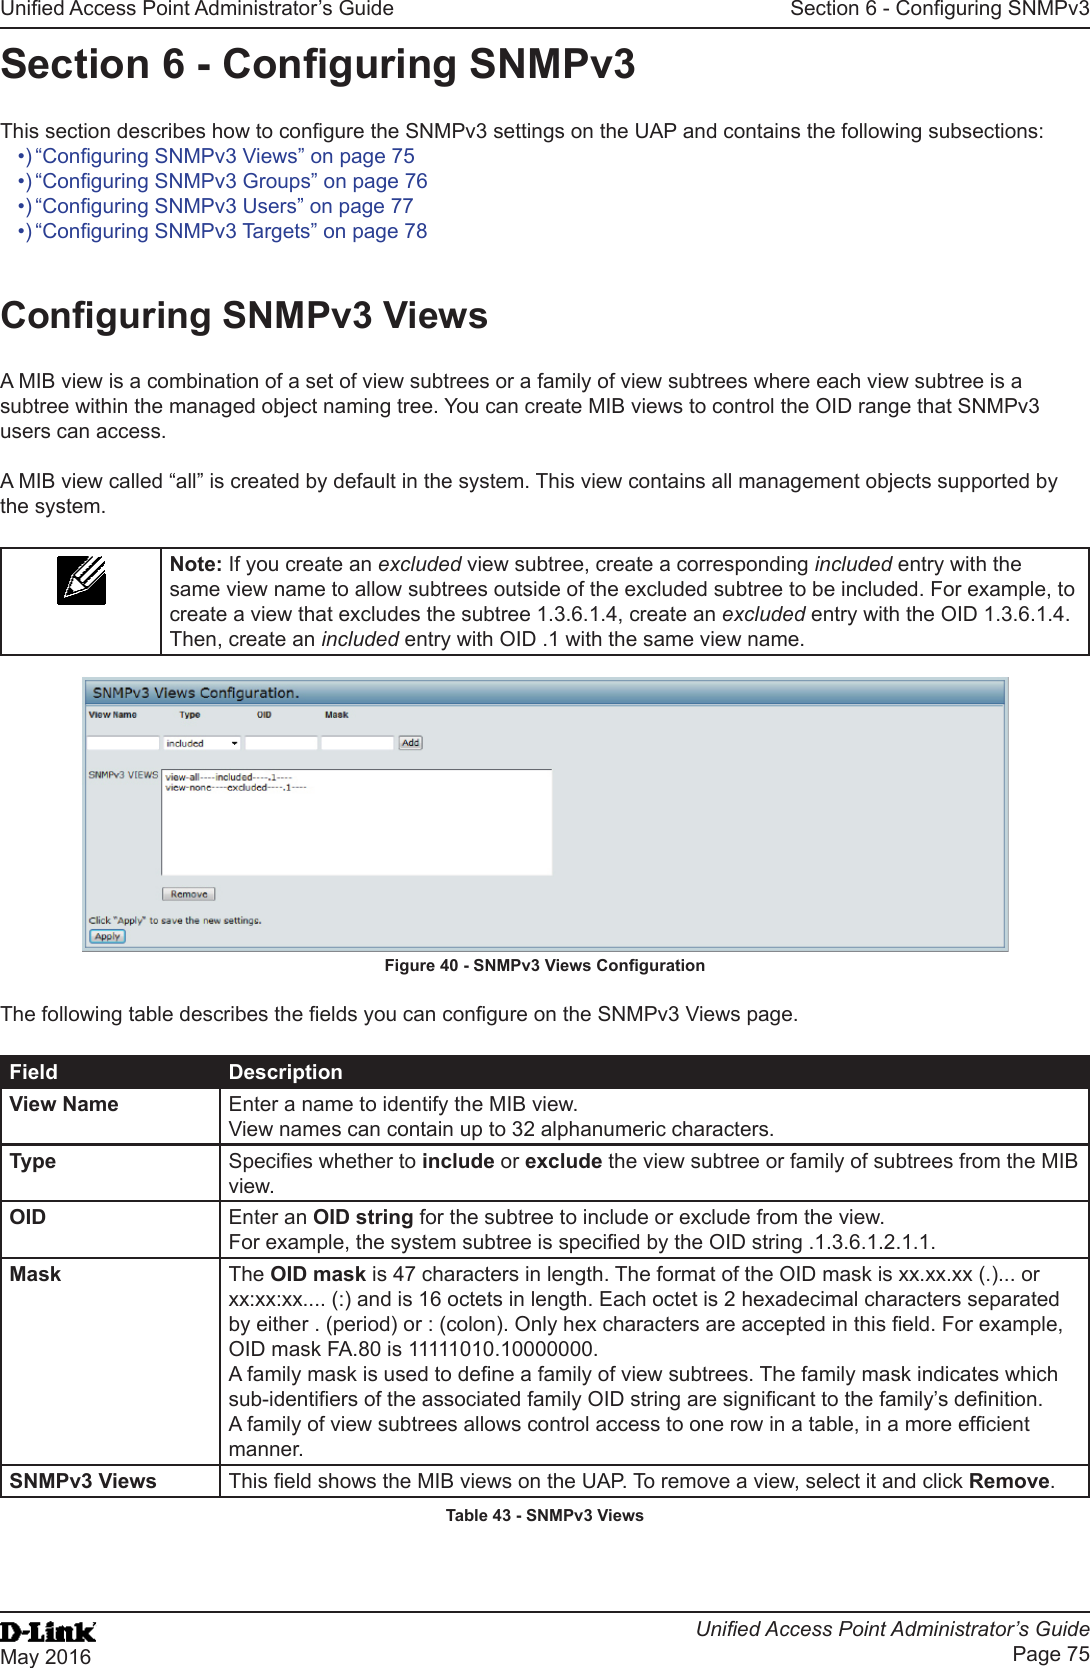 Unied Access Point Administrator’s GuideUnied Access Point Administrator’s GuidePage 75May 2016Section 6 - Conguring SNMPv3Section 6 - Conguring SNMPv3This section describes how to congure the SNMPv3 settings on the UAP and contains the following subsections:•) “Conguring SNMPv3 Views” on page 75•) “Conguring SNMPv3 Groups” on page 76•) “Conguring SNMPv3 Users” on page 77•) “Conguring SNMPv3 Targets” on page 78Conguring SNMPv3 ViewsA MIB view is a combination of a set of view subtrees or a family of view subtrees where each view subtree is a subtree within the managed object naming tree. You can create MIB views to control the OID range that SNMPv3 users can access.A MIB view called “all” is created by default in the system. This view contains all management objects supported by the system.Note: If you create an excluded view subtree, create a corresponding included entry with the same view name to allow subtrees outside of the excluded subtree to be included. For example, to create a view that excludes the subtree 1.3.6.1.4, create an excluded entry with the OID 1.3.6.1.4. Then, create an included entry with OID .1 with the same view name. Figure 40 - SNMPv3 Views CongurationThe following table describes the elds you can congure on the SNMPv3 Views page.Field DescriptionView Name Enter a name to identify the MIB view. View names can contain up to 32 alphanumeric characters.Type Species whether to include or exclude the view subtree or family of subtrees from the MIB view.OID Enter an OID string for the subtree to include or exclude from the view. For example, the system subtree is specied by the OID string .1.3.6.1.2.1.1.Mask The OID mask is 47 characters in length. The format of the OID mask is xx.xx.xx (.)... or xx:xx:xx.... (:) and is 16 octets in length. Each octet is 2 hexadecimal characters separated by either . (period) or : (colon). Only hex characters are accepted in this eld. For example, OID mask FA.80 is 11111010.10000000.A family mask is used to dene a family of view subtrees. The family mask indicates which sub-identiers of the associated family OID string are signicant to the family’s denition. A family of view subtrees allows control access to one row in a table, in a more efcient manner.SNMPv3 Views This eld shows the MIB views on the UAP. To remove a view, select it and click Remove.Table 43 - SNMPv3 Views